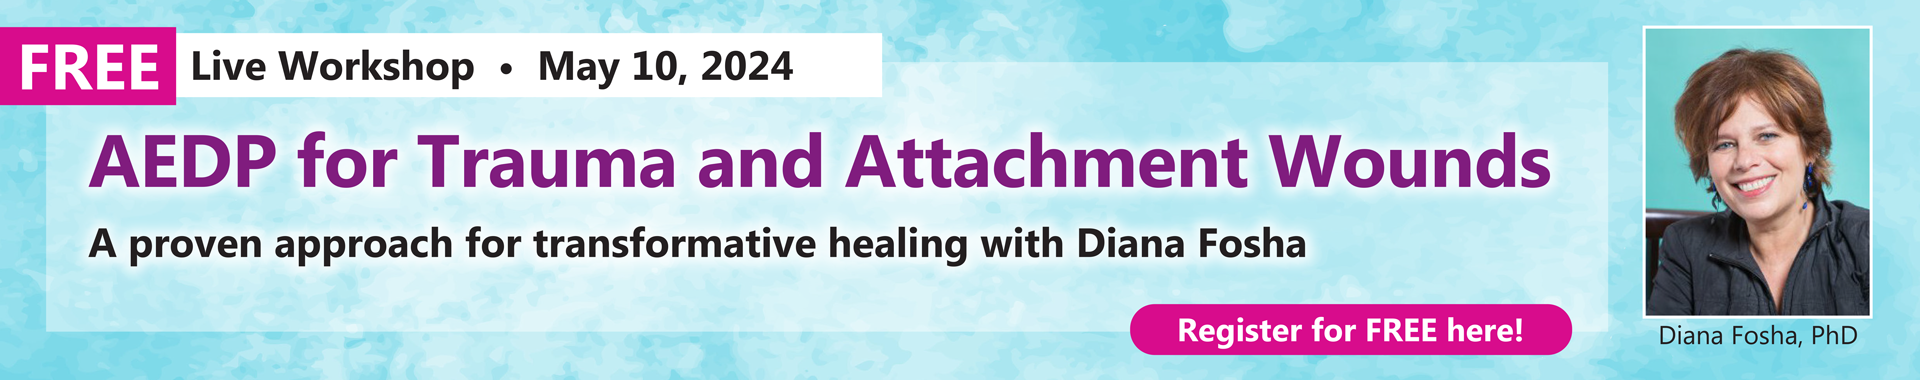 FREE LIVE EVENT! | AEDP for Trauma and Attachment Wounds: A Proven Approach for Transformative Healing with Diana Fosha